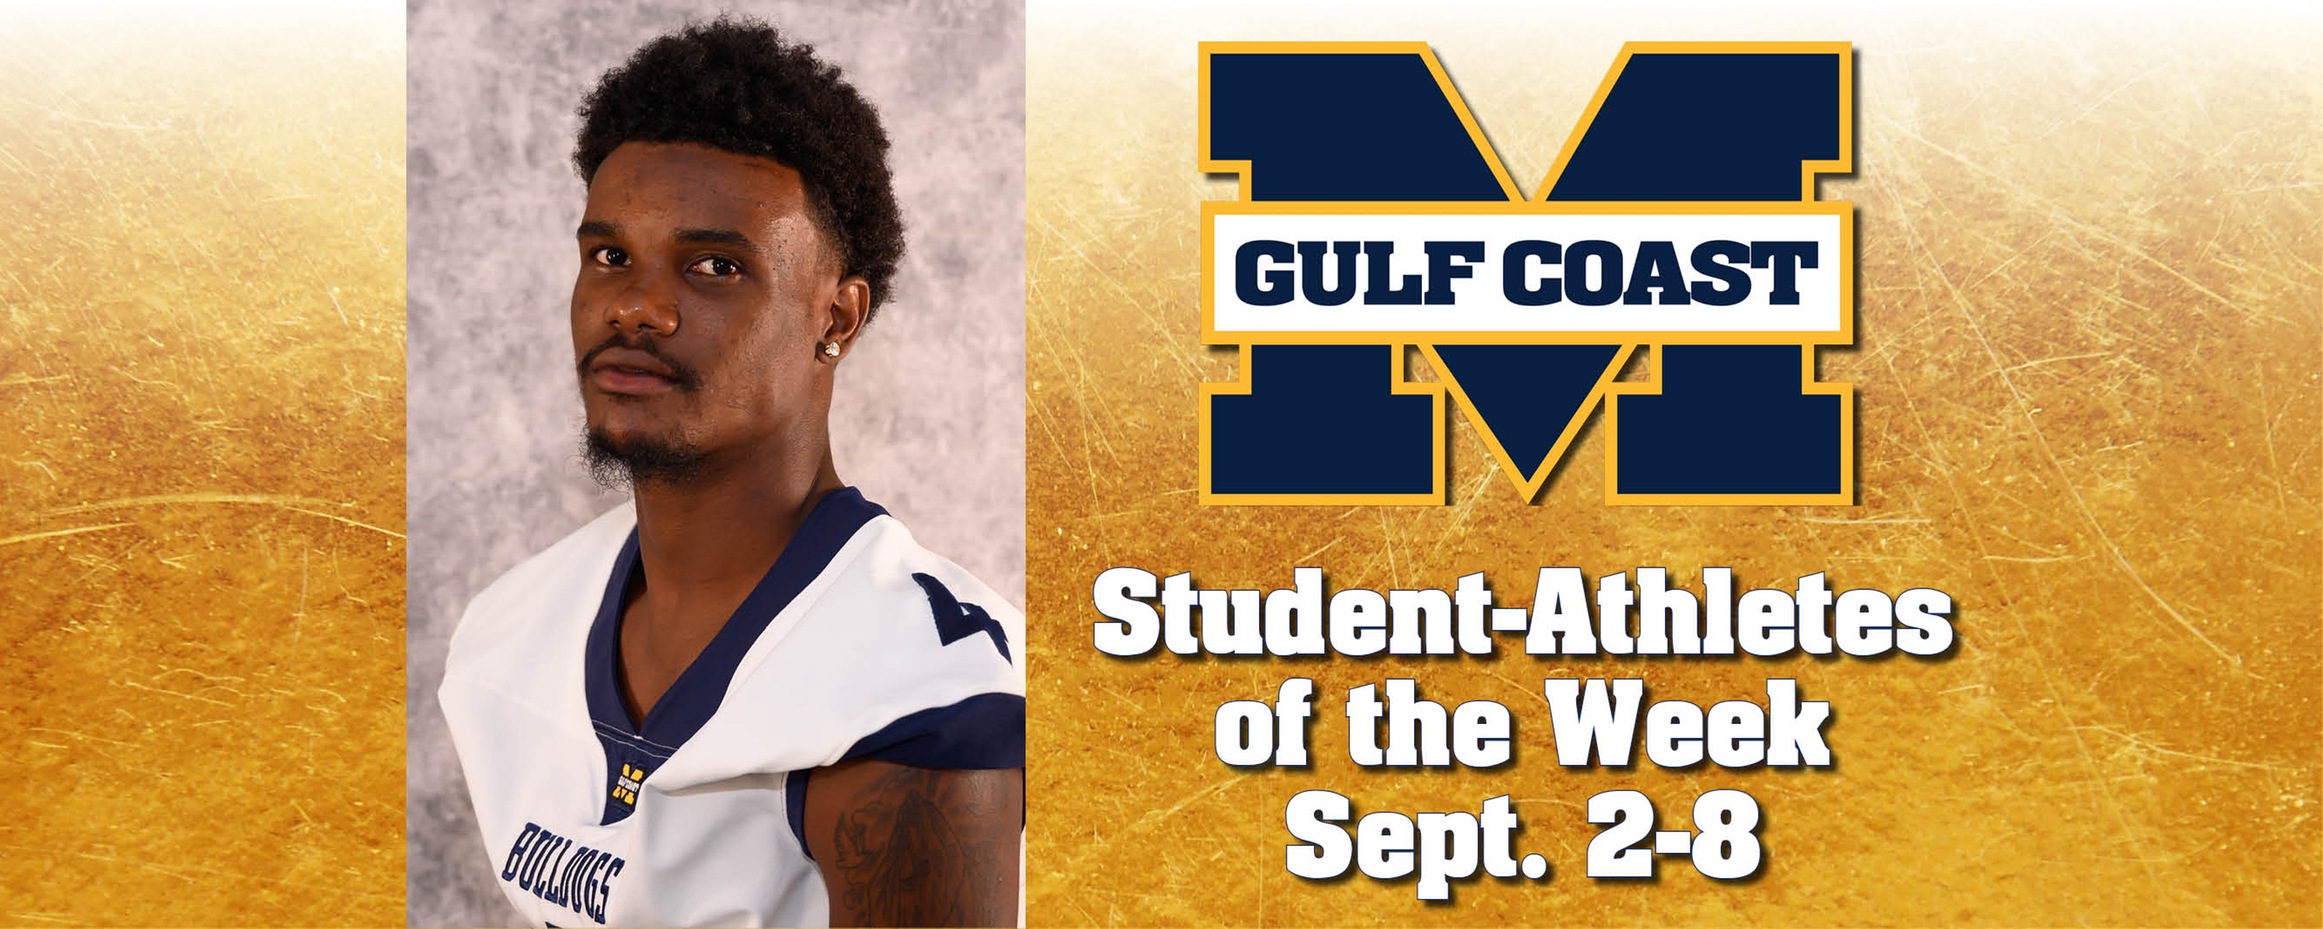 Hester named MGCCC Student-Athlete of the Week